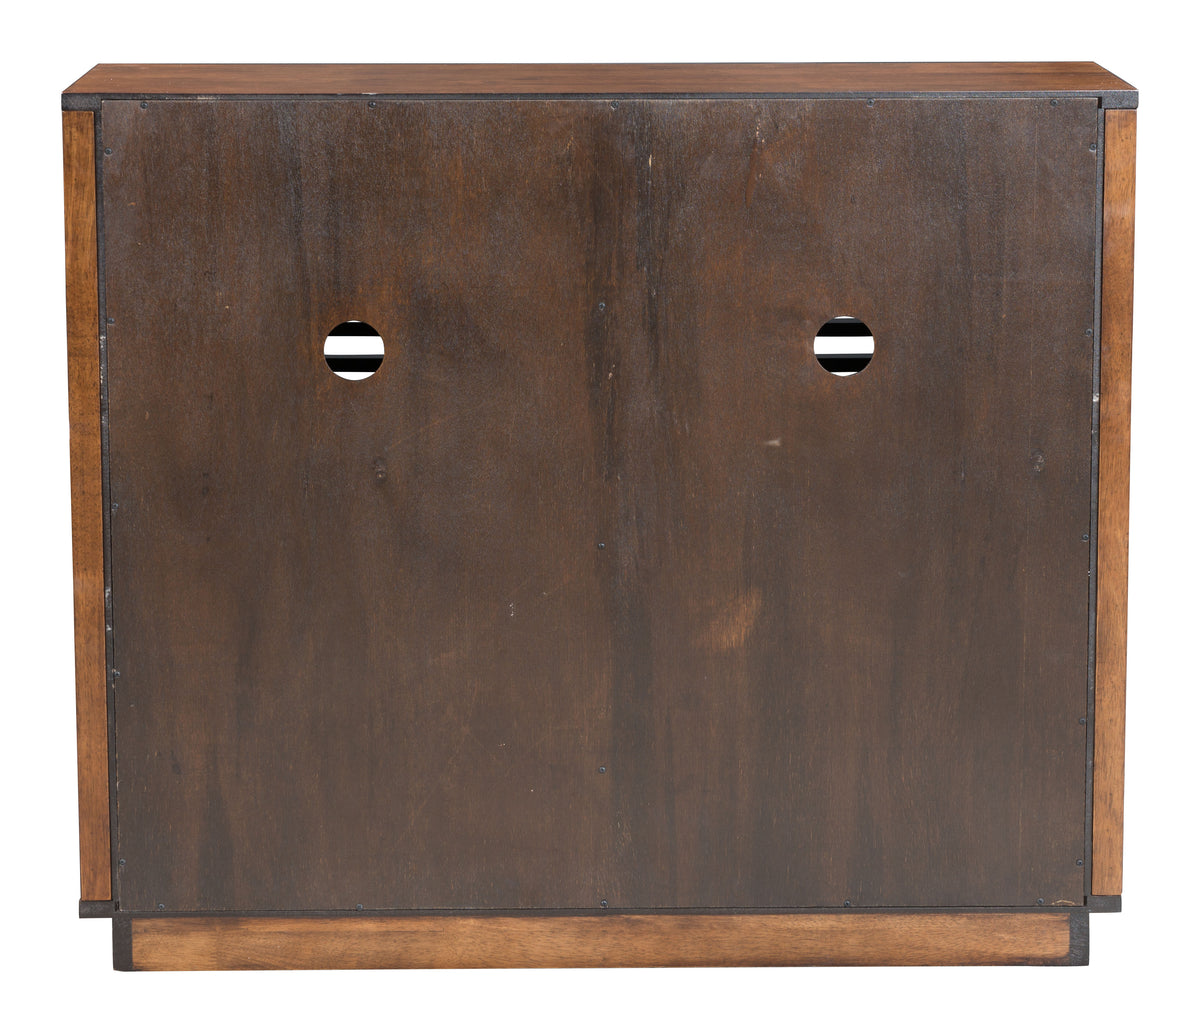 Linea Cabinet - YuppyCollections